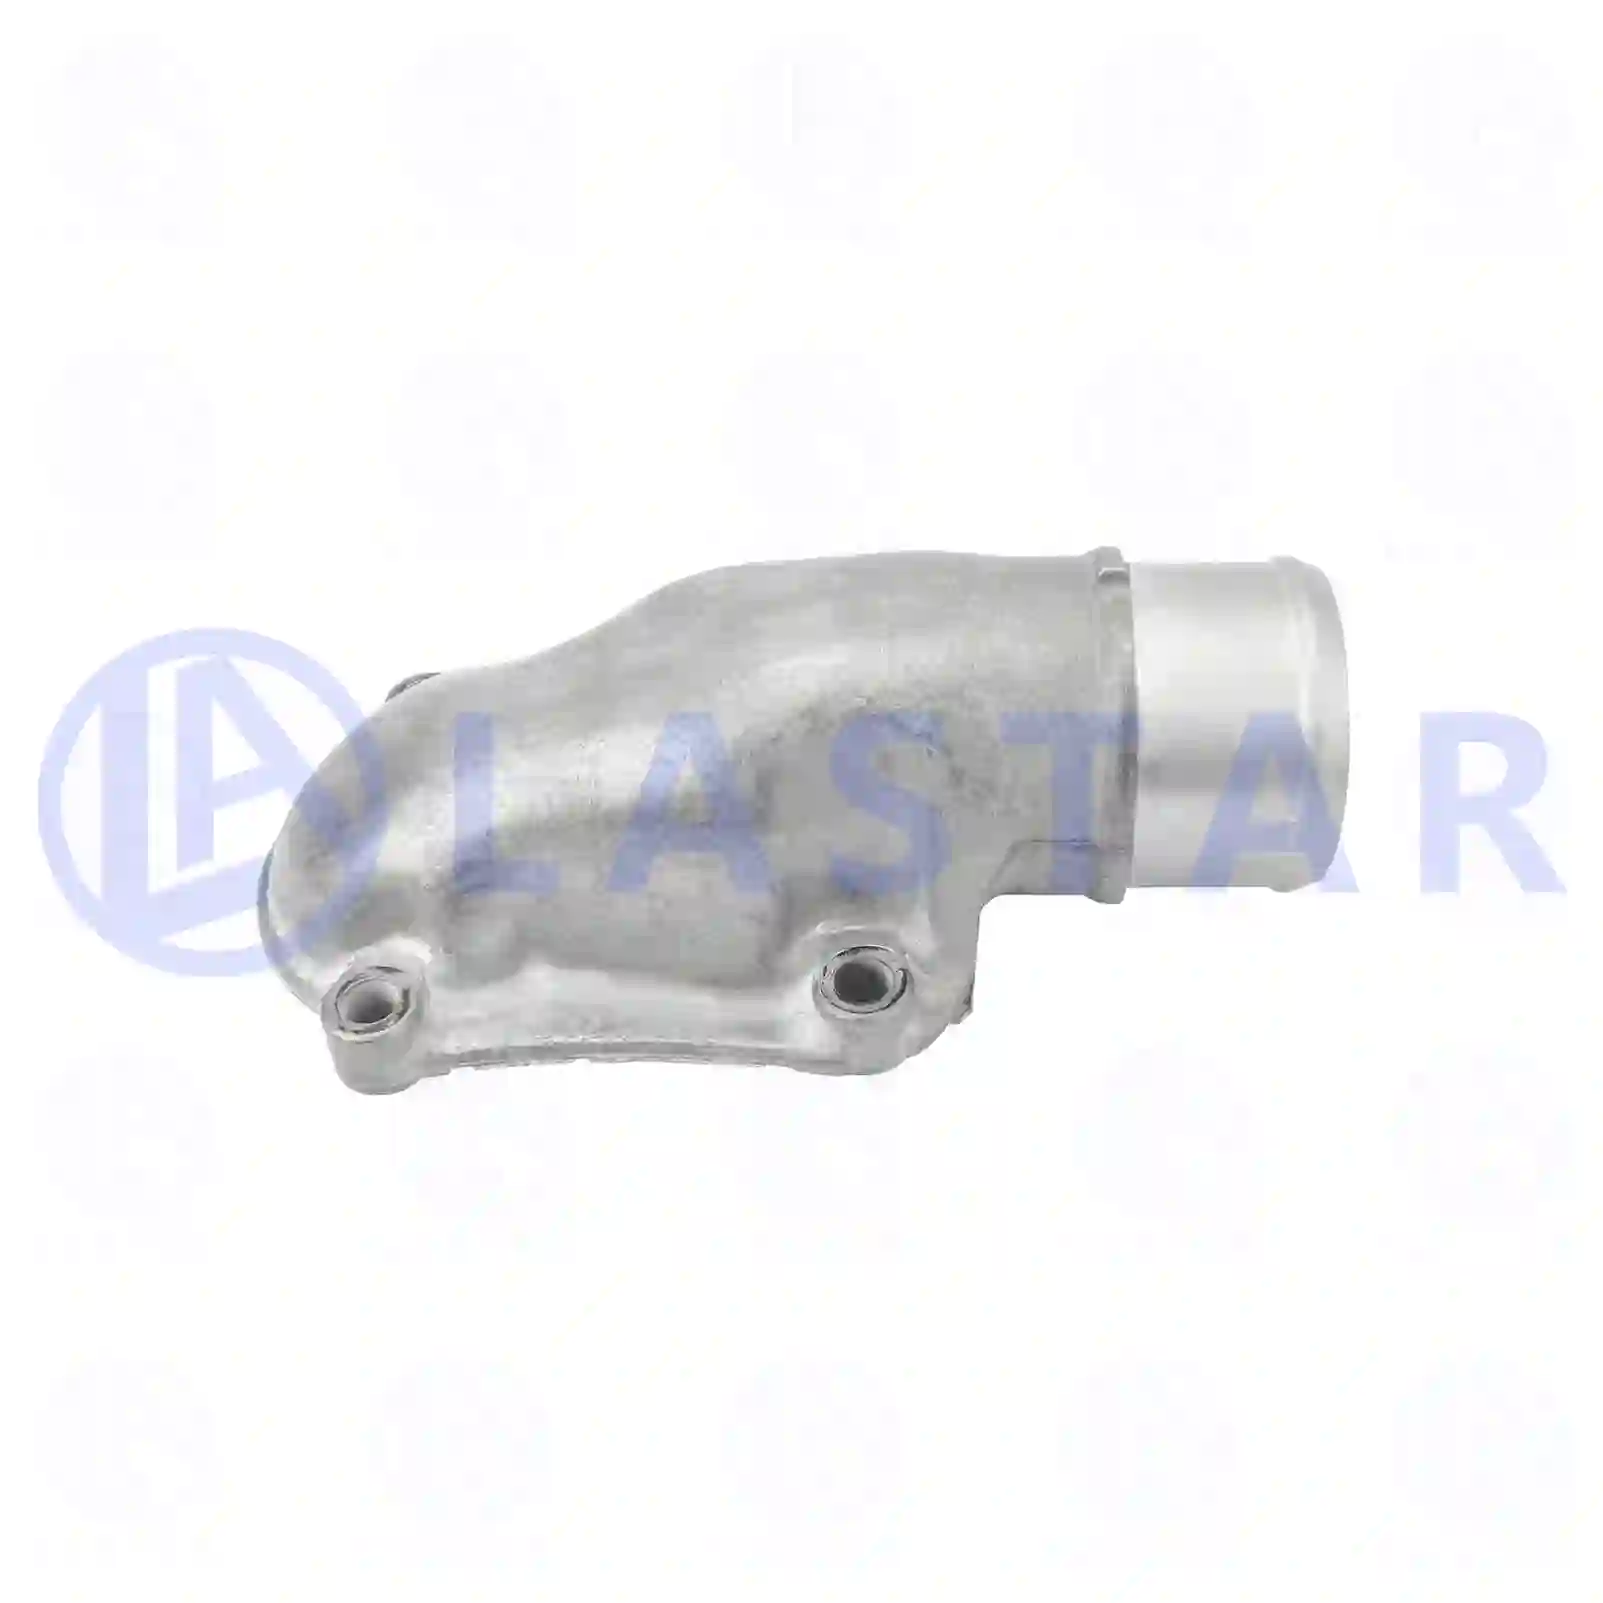 Thermostat housing, 77709764, 1368423, 1398473, 1478655 ||  77709764 Lastar Spare Part | Truck Spare Parts, Auotomotive Spare Parts Thermostat housing, 77709764, 1368423, 1398473, 1478655 ||  77709764 Lastar Spare Part | Truck Spare Parts, Auotomotive Spare Parts